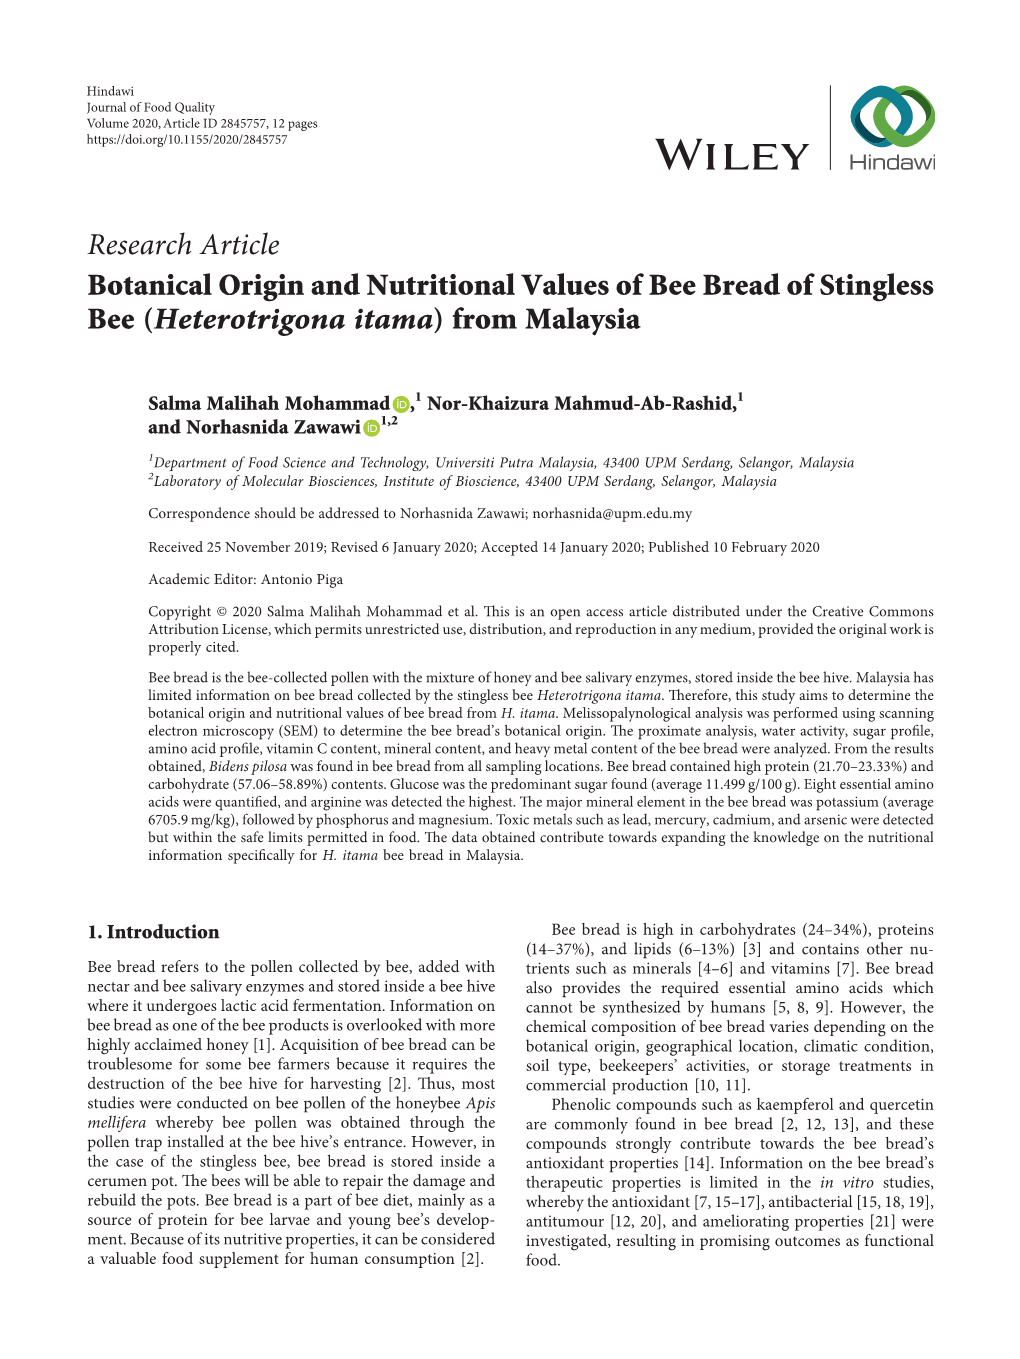 Research Article Botanical Origin and Nutritional Values of Bee Bread of Stingless Bee (Heterotrigona Itama) from Malaysia